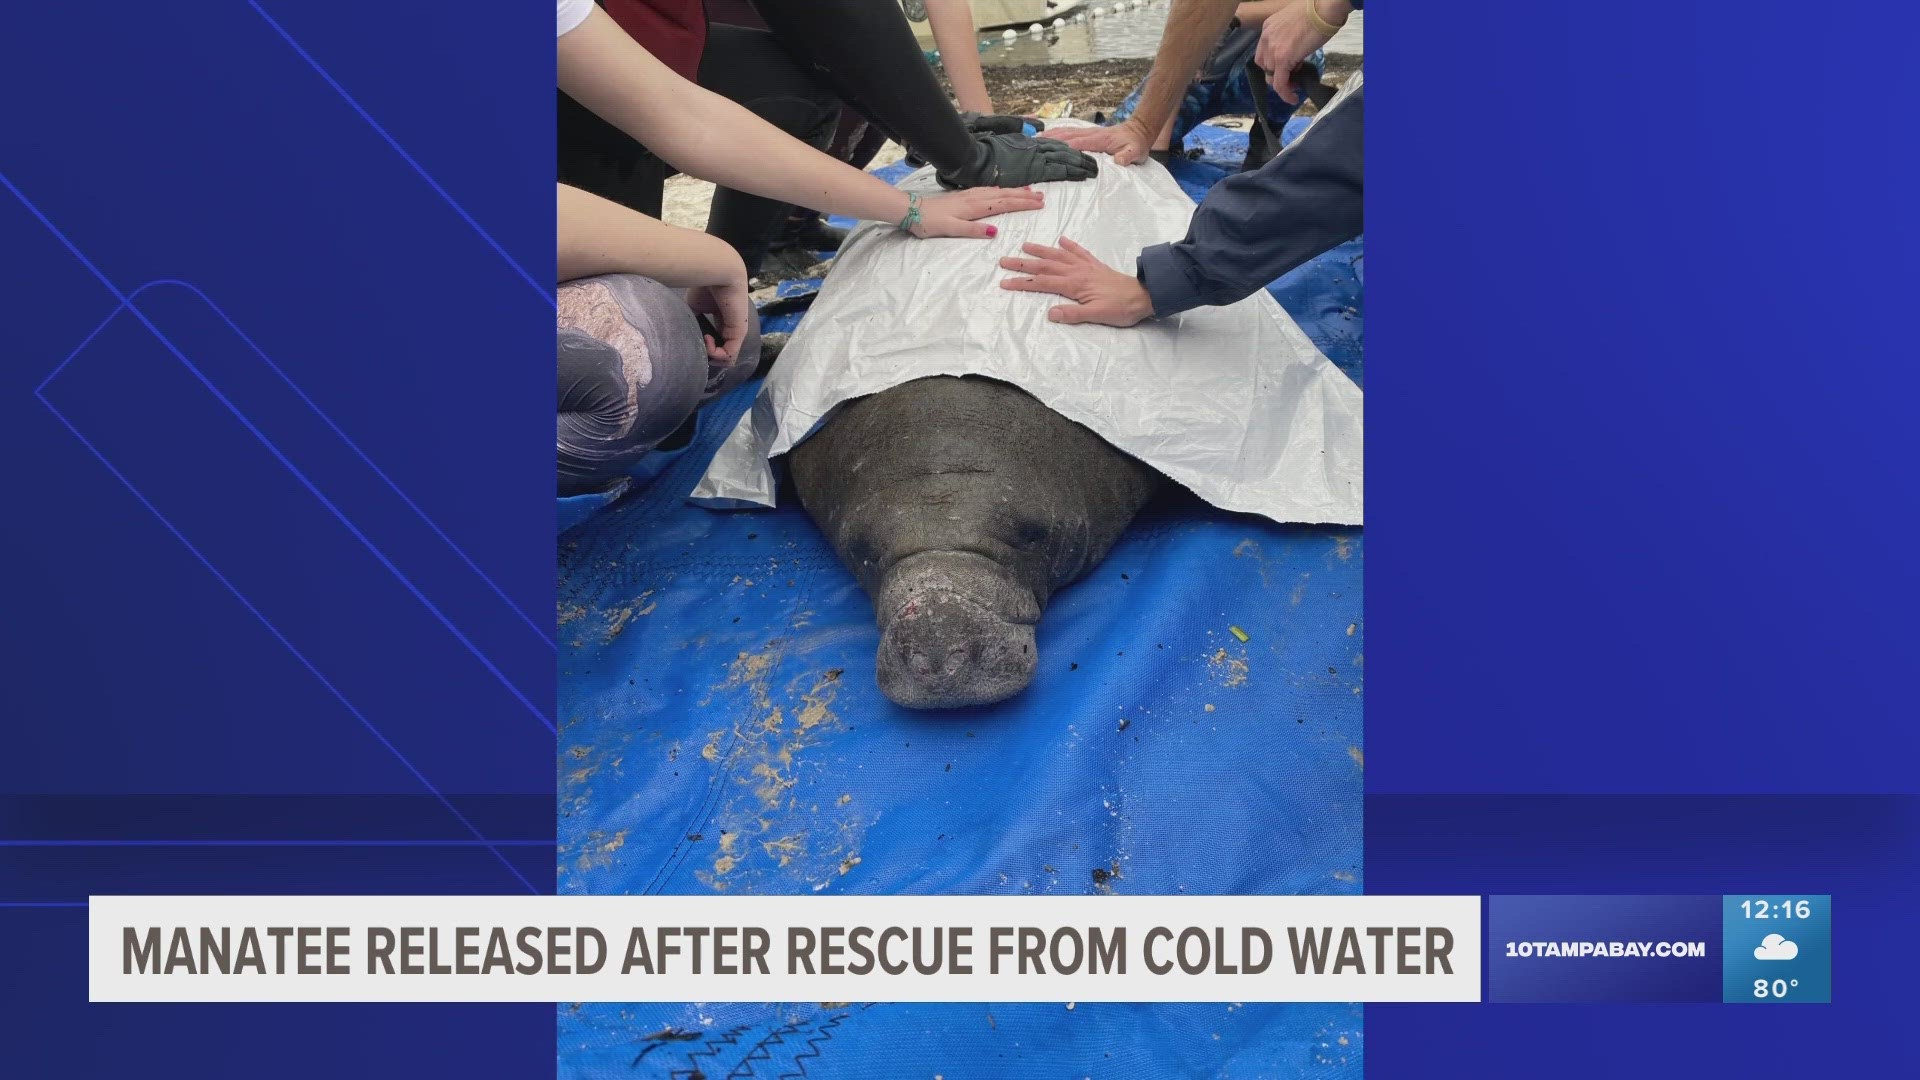 The manatee was stranded and seriously hurt from the cold water. After some care and rehabilitation, it's been released into warmer waters.